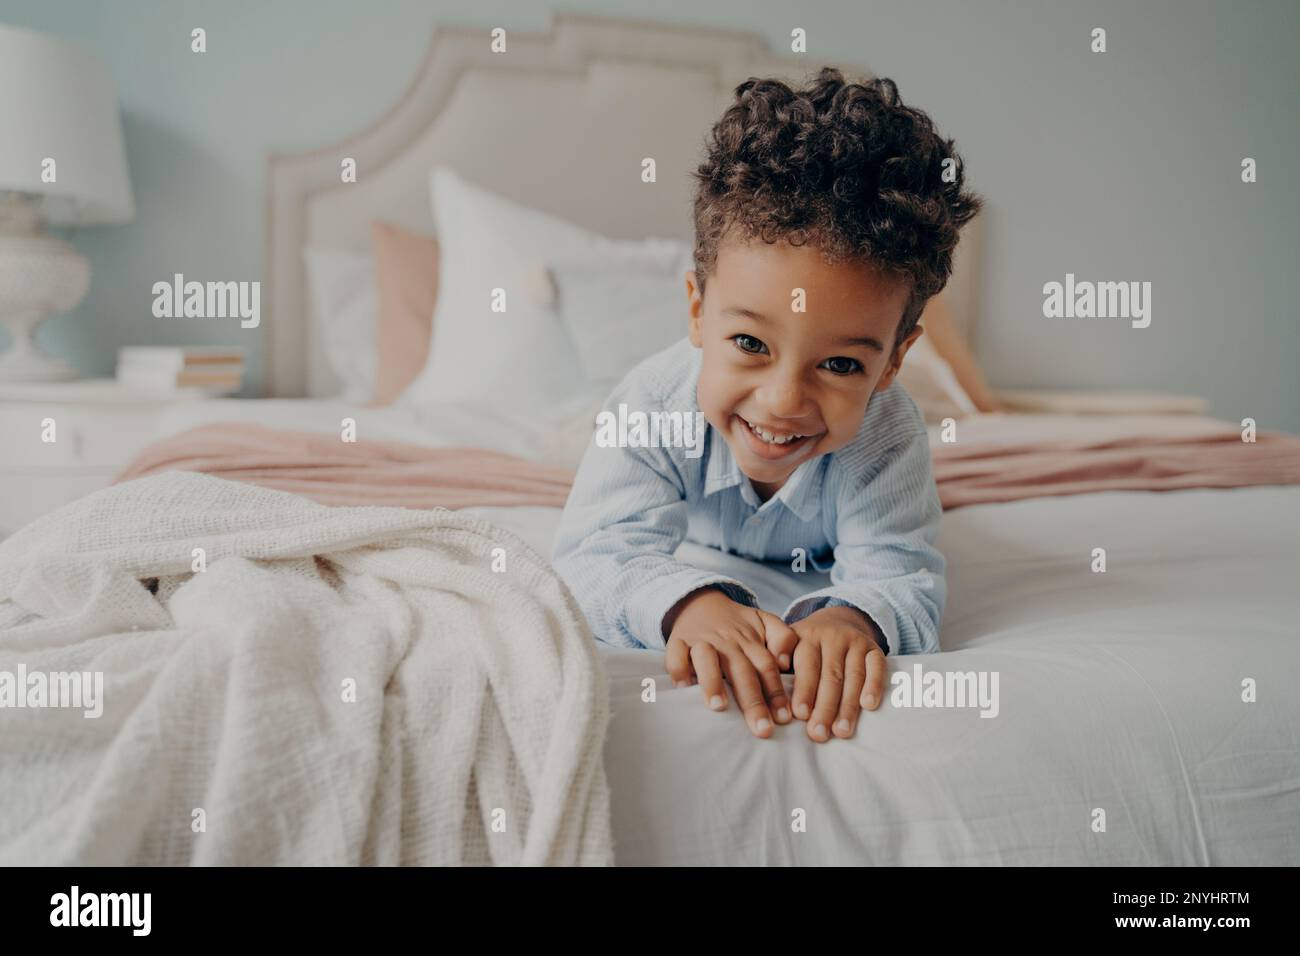 Portrait of happy curly mulatto boy smiling at camera while laying on cozy bed, relaxing after fun playing session at home, adorable preschool child e Stock Photo